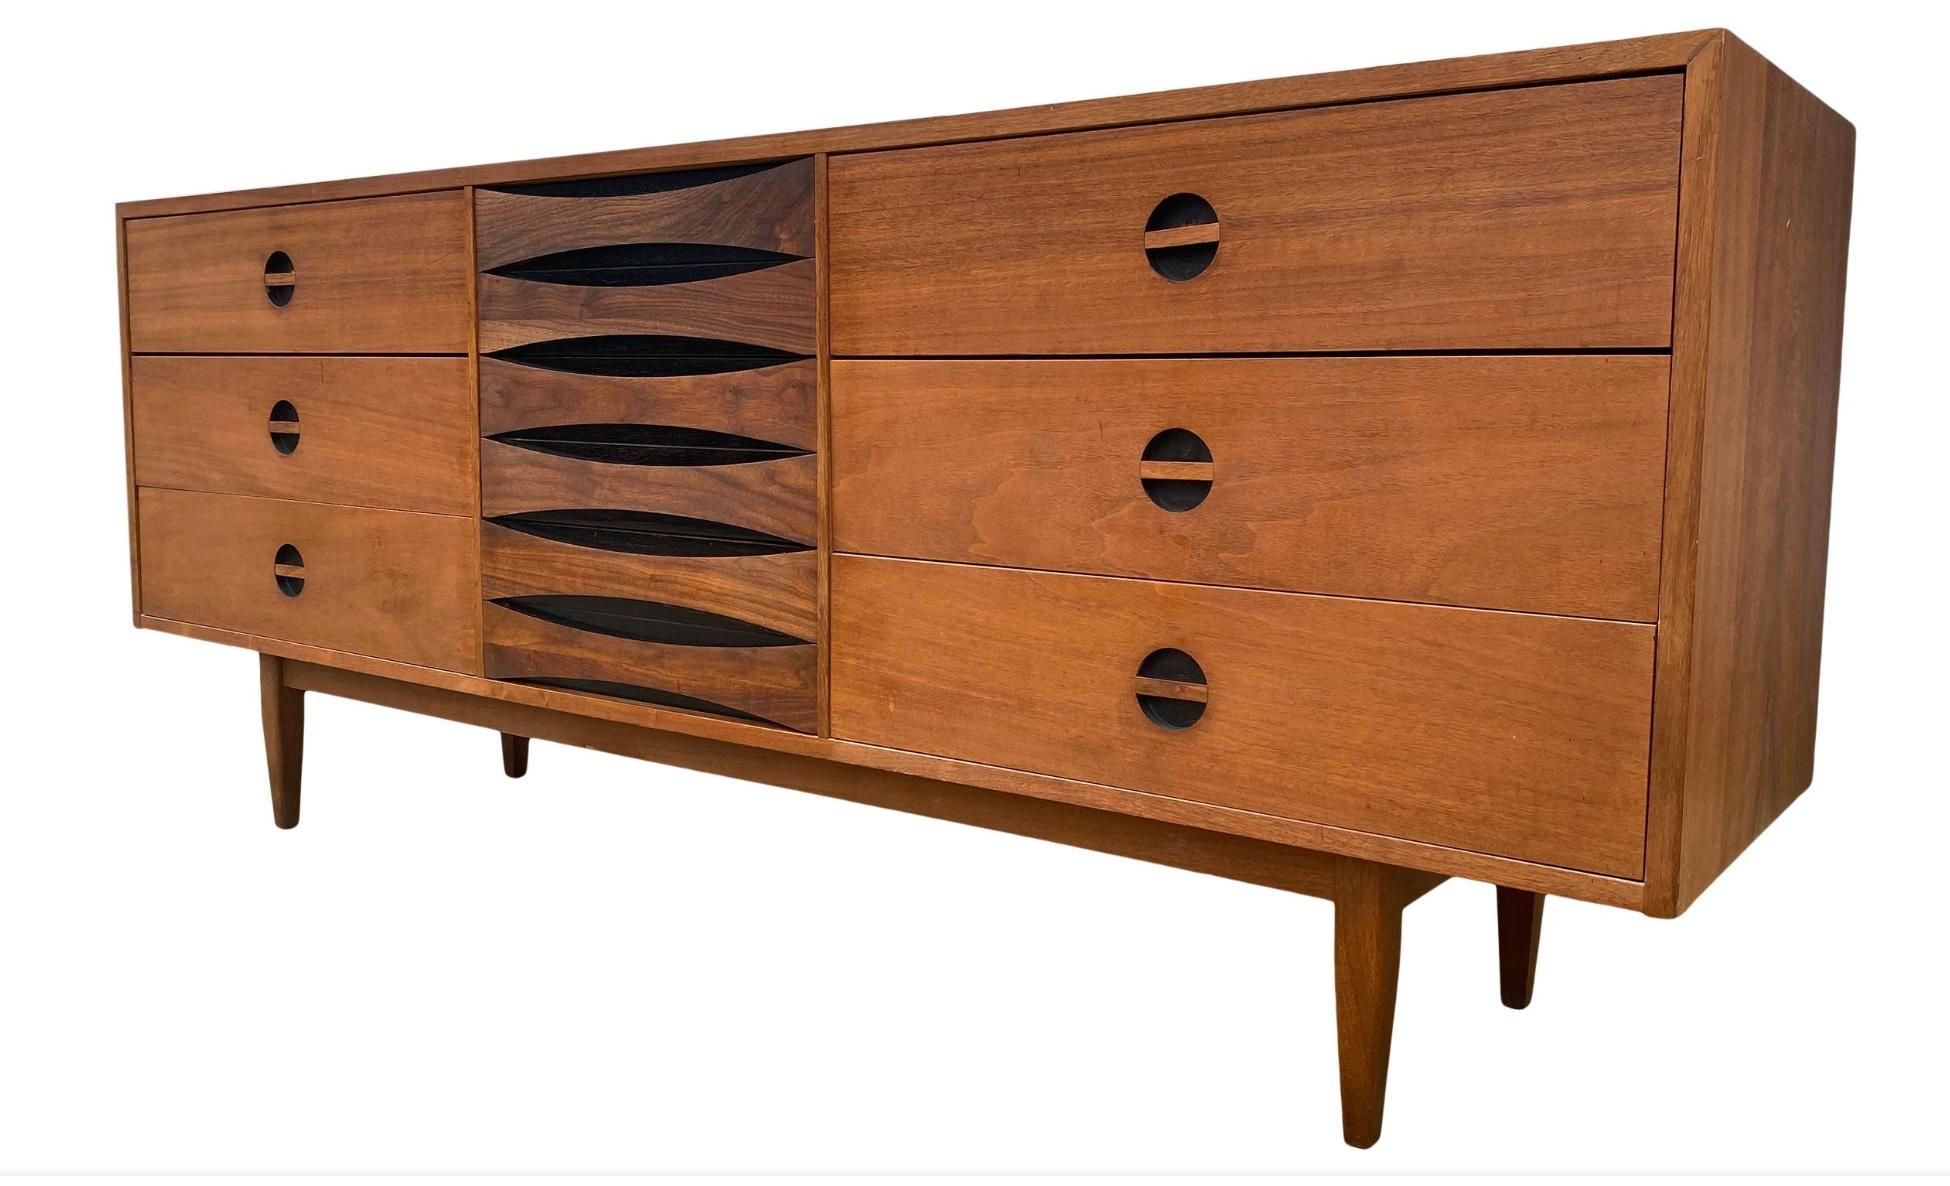 An exceptional long low Mid-Century Modern Arne Vodder style walnut 9-drawer dresser credenza by West Michigan Furniture Co. The dresser features beautiful walnut wood grain with sculpted recessed drawer pulls. It offers ample storage with nine